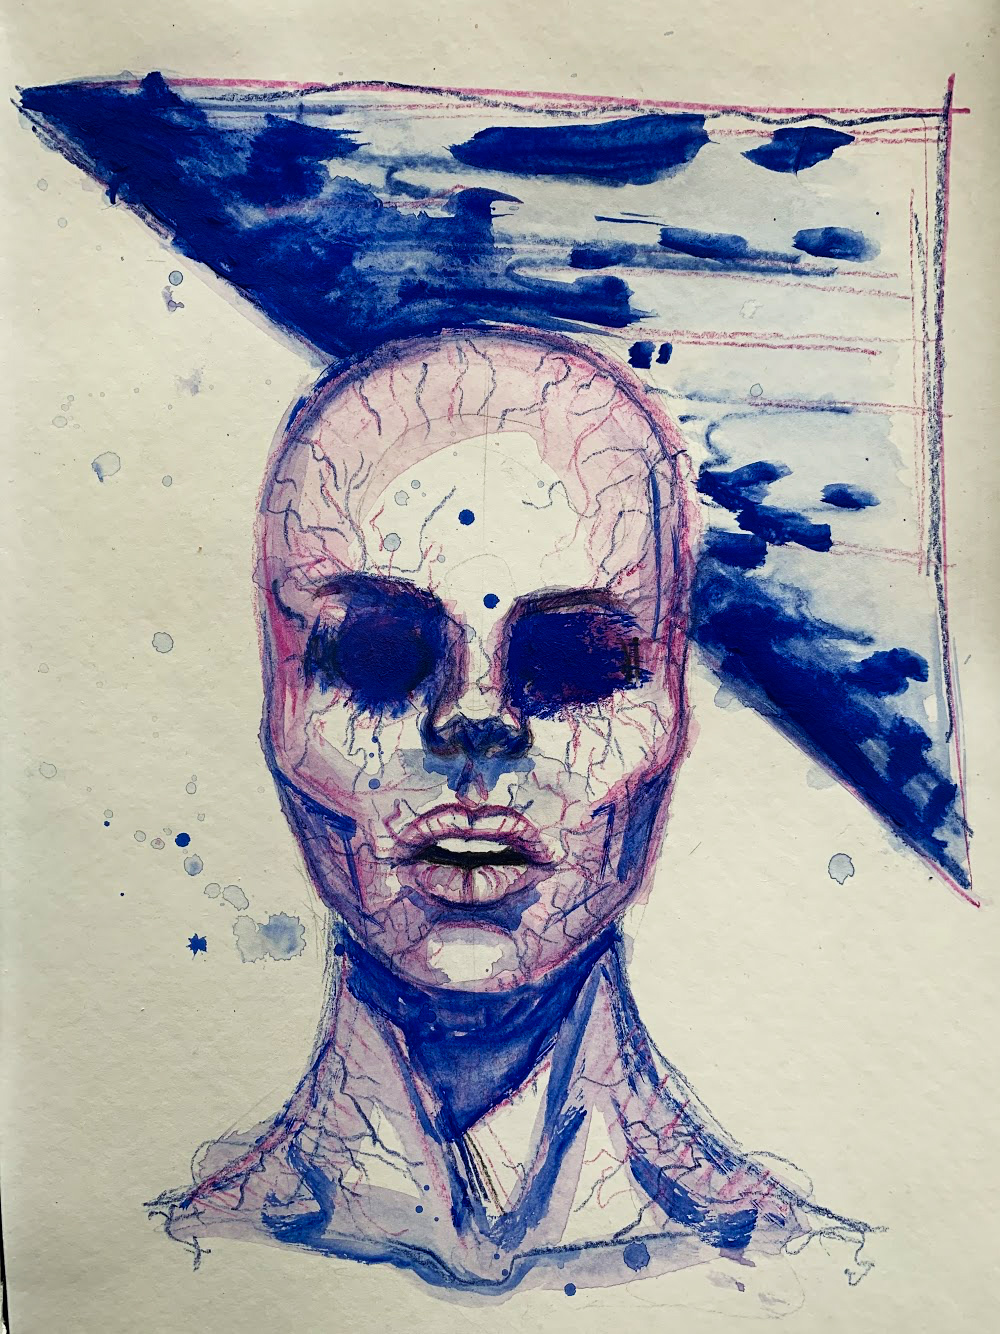 IMAGE: A disembodied neck and head covered in visible veins and without eyes or hair looks in the direction of the viewer. A right triangle outlined in crayon and partially painted over in water color is in the background.